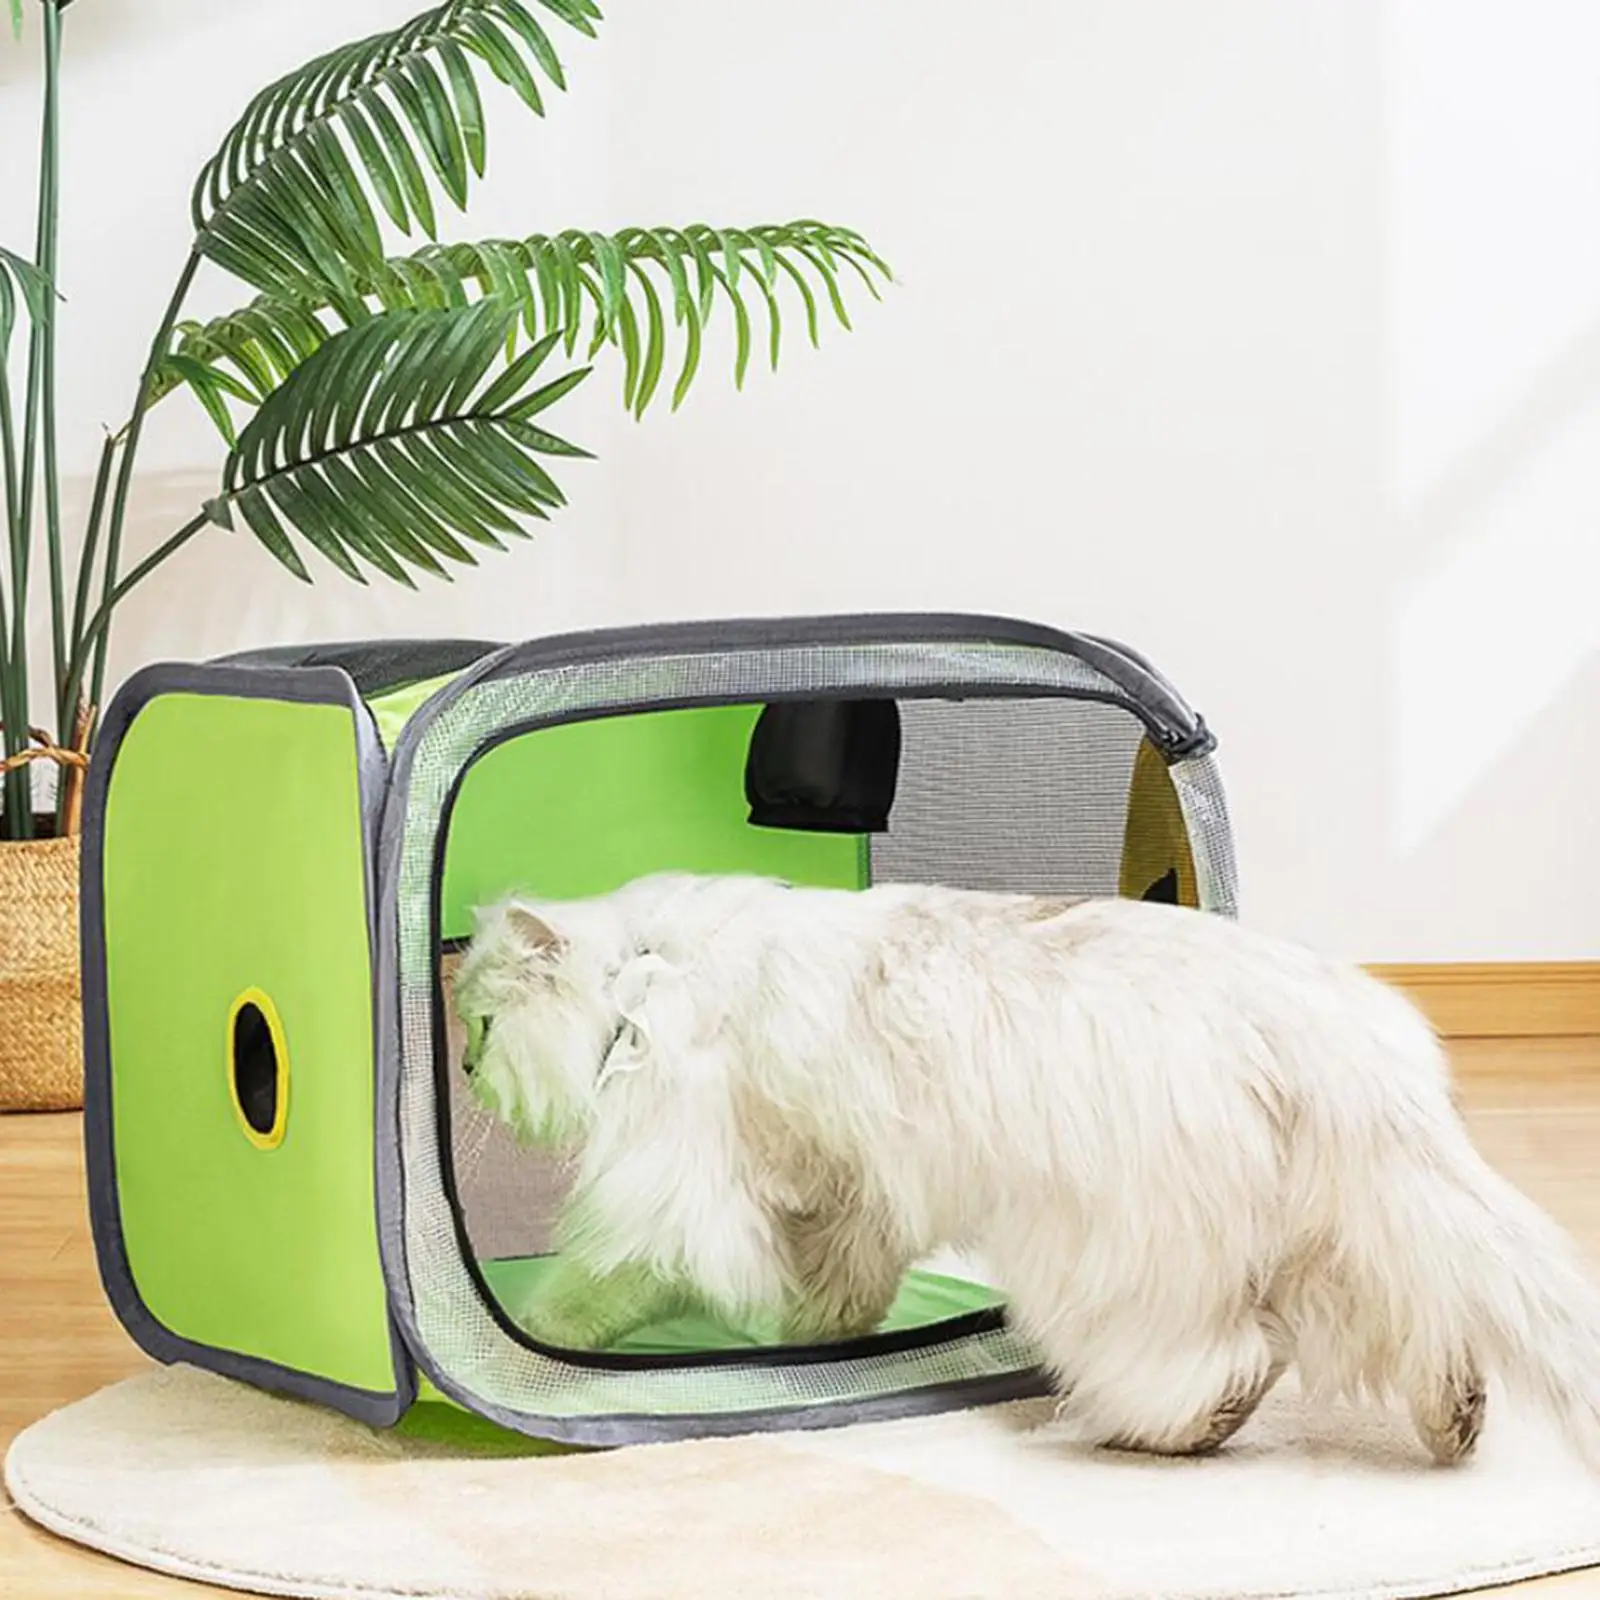 Pet Drying Box Hair Dryer Clean House Grooming Portable Anti Grab Cats Dogs Dryer Cage Drying Room for Shower Kitty Outdoor Bath